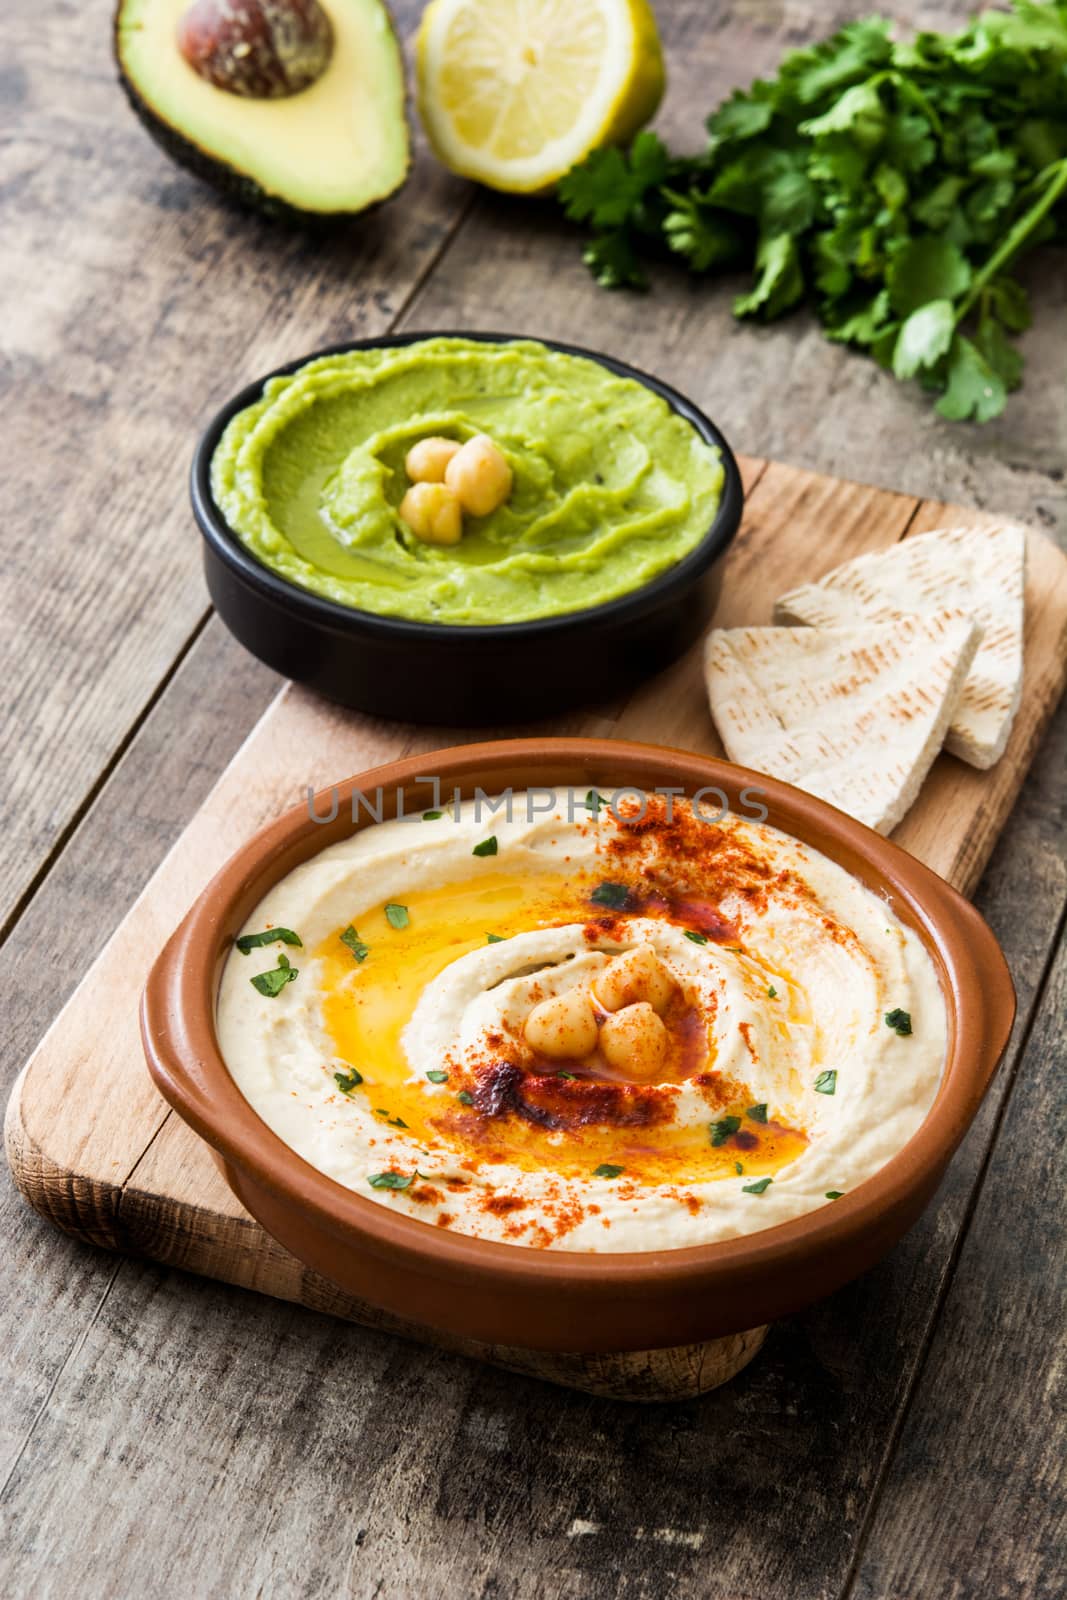 Different hummus bowls. Chickpea hummus, avocado hummus and lentils hummus on wooden table by chandlervid85